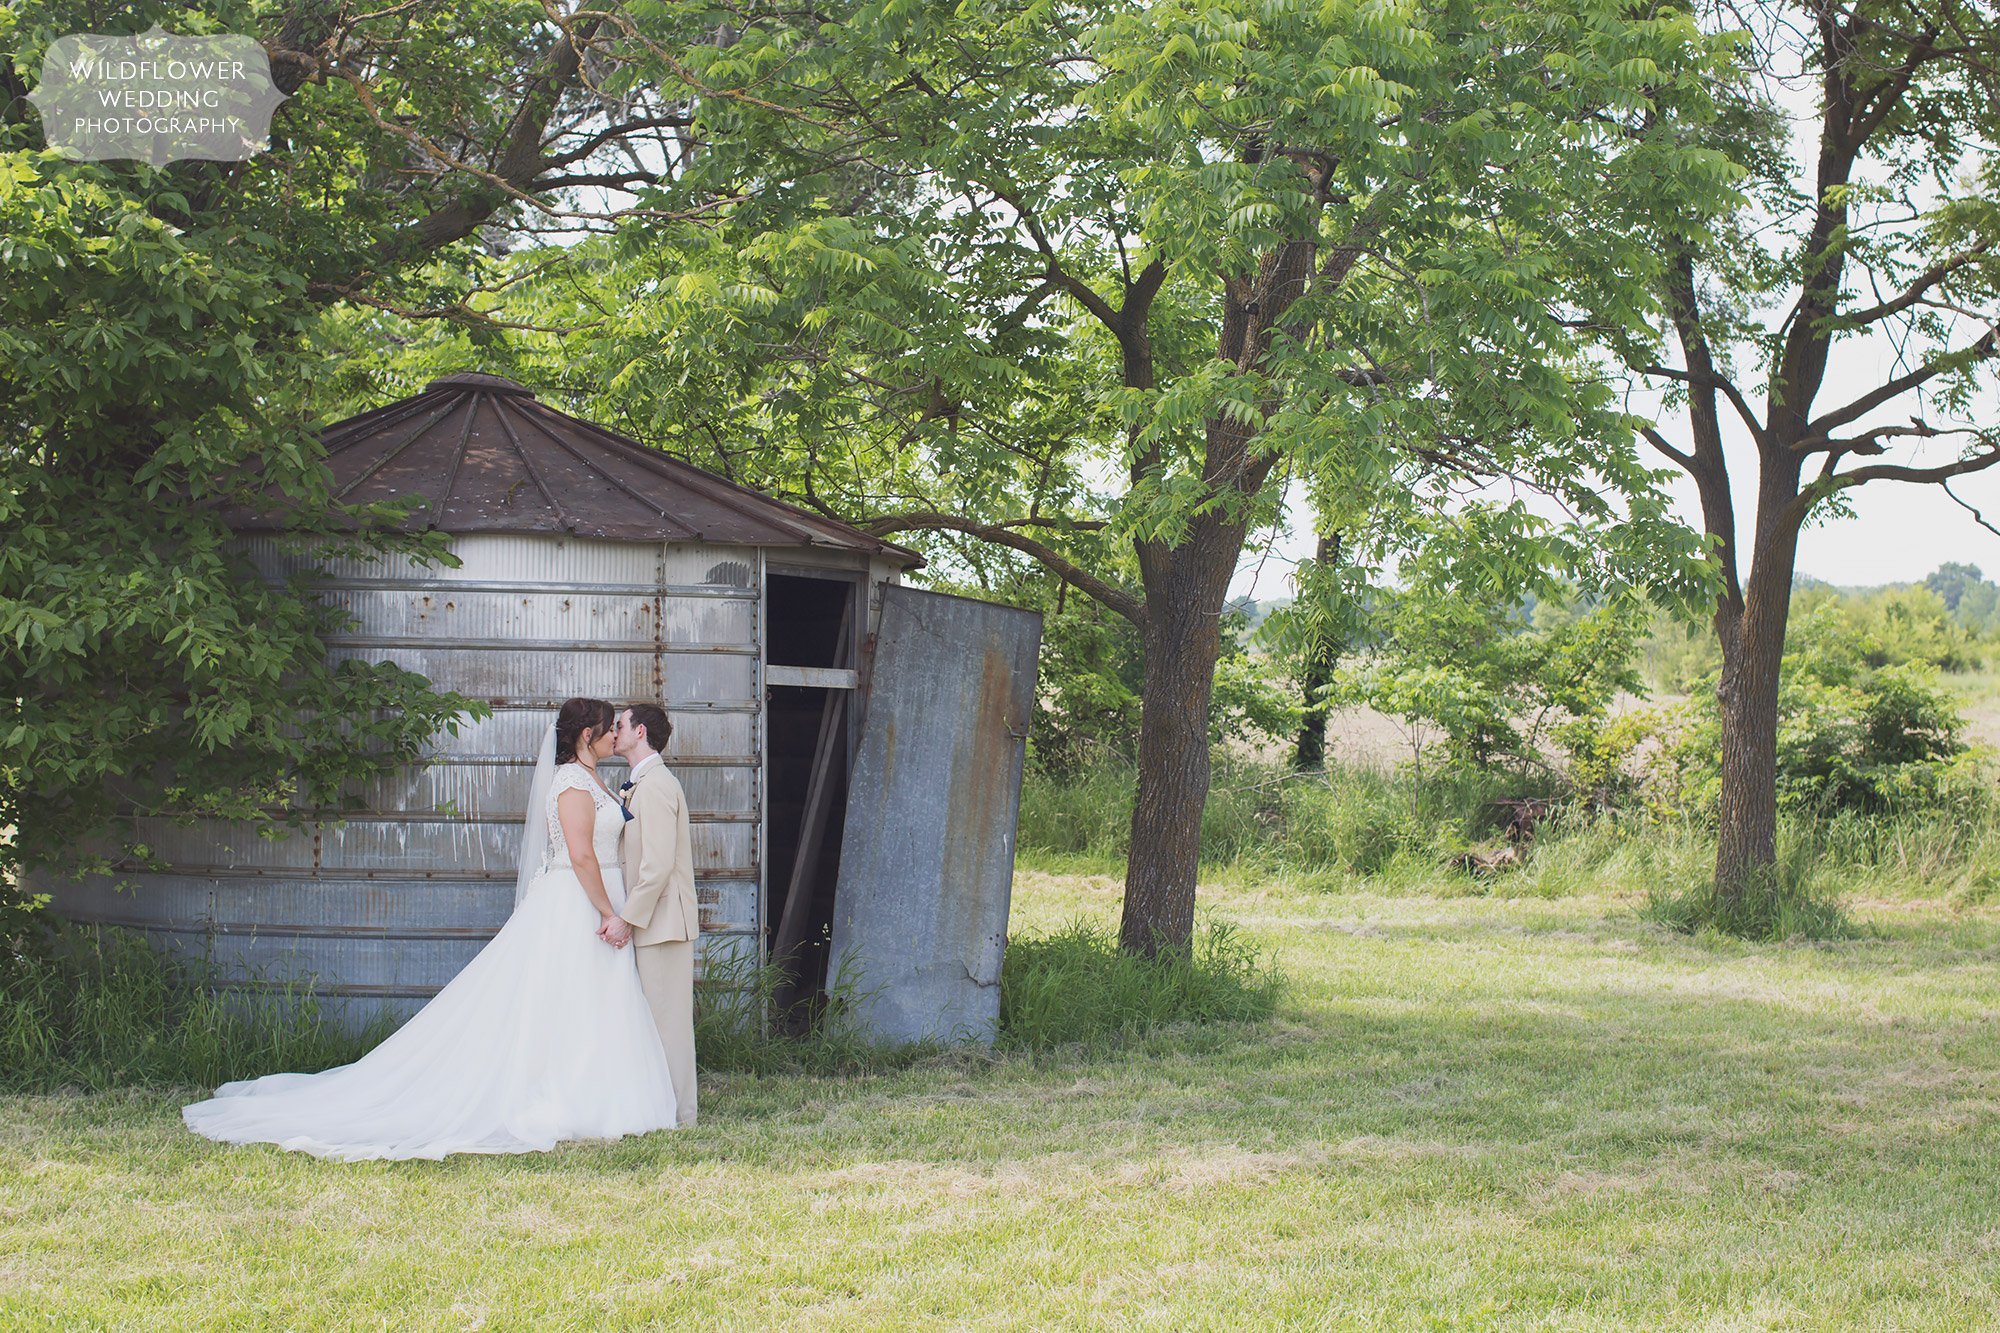 This is one of the best outdoor country wedding venues near Columbia, MO at the MU Bradford Research Farm.